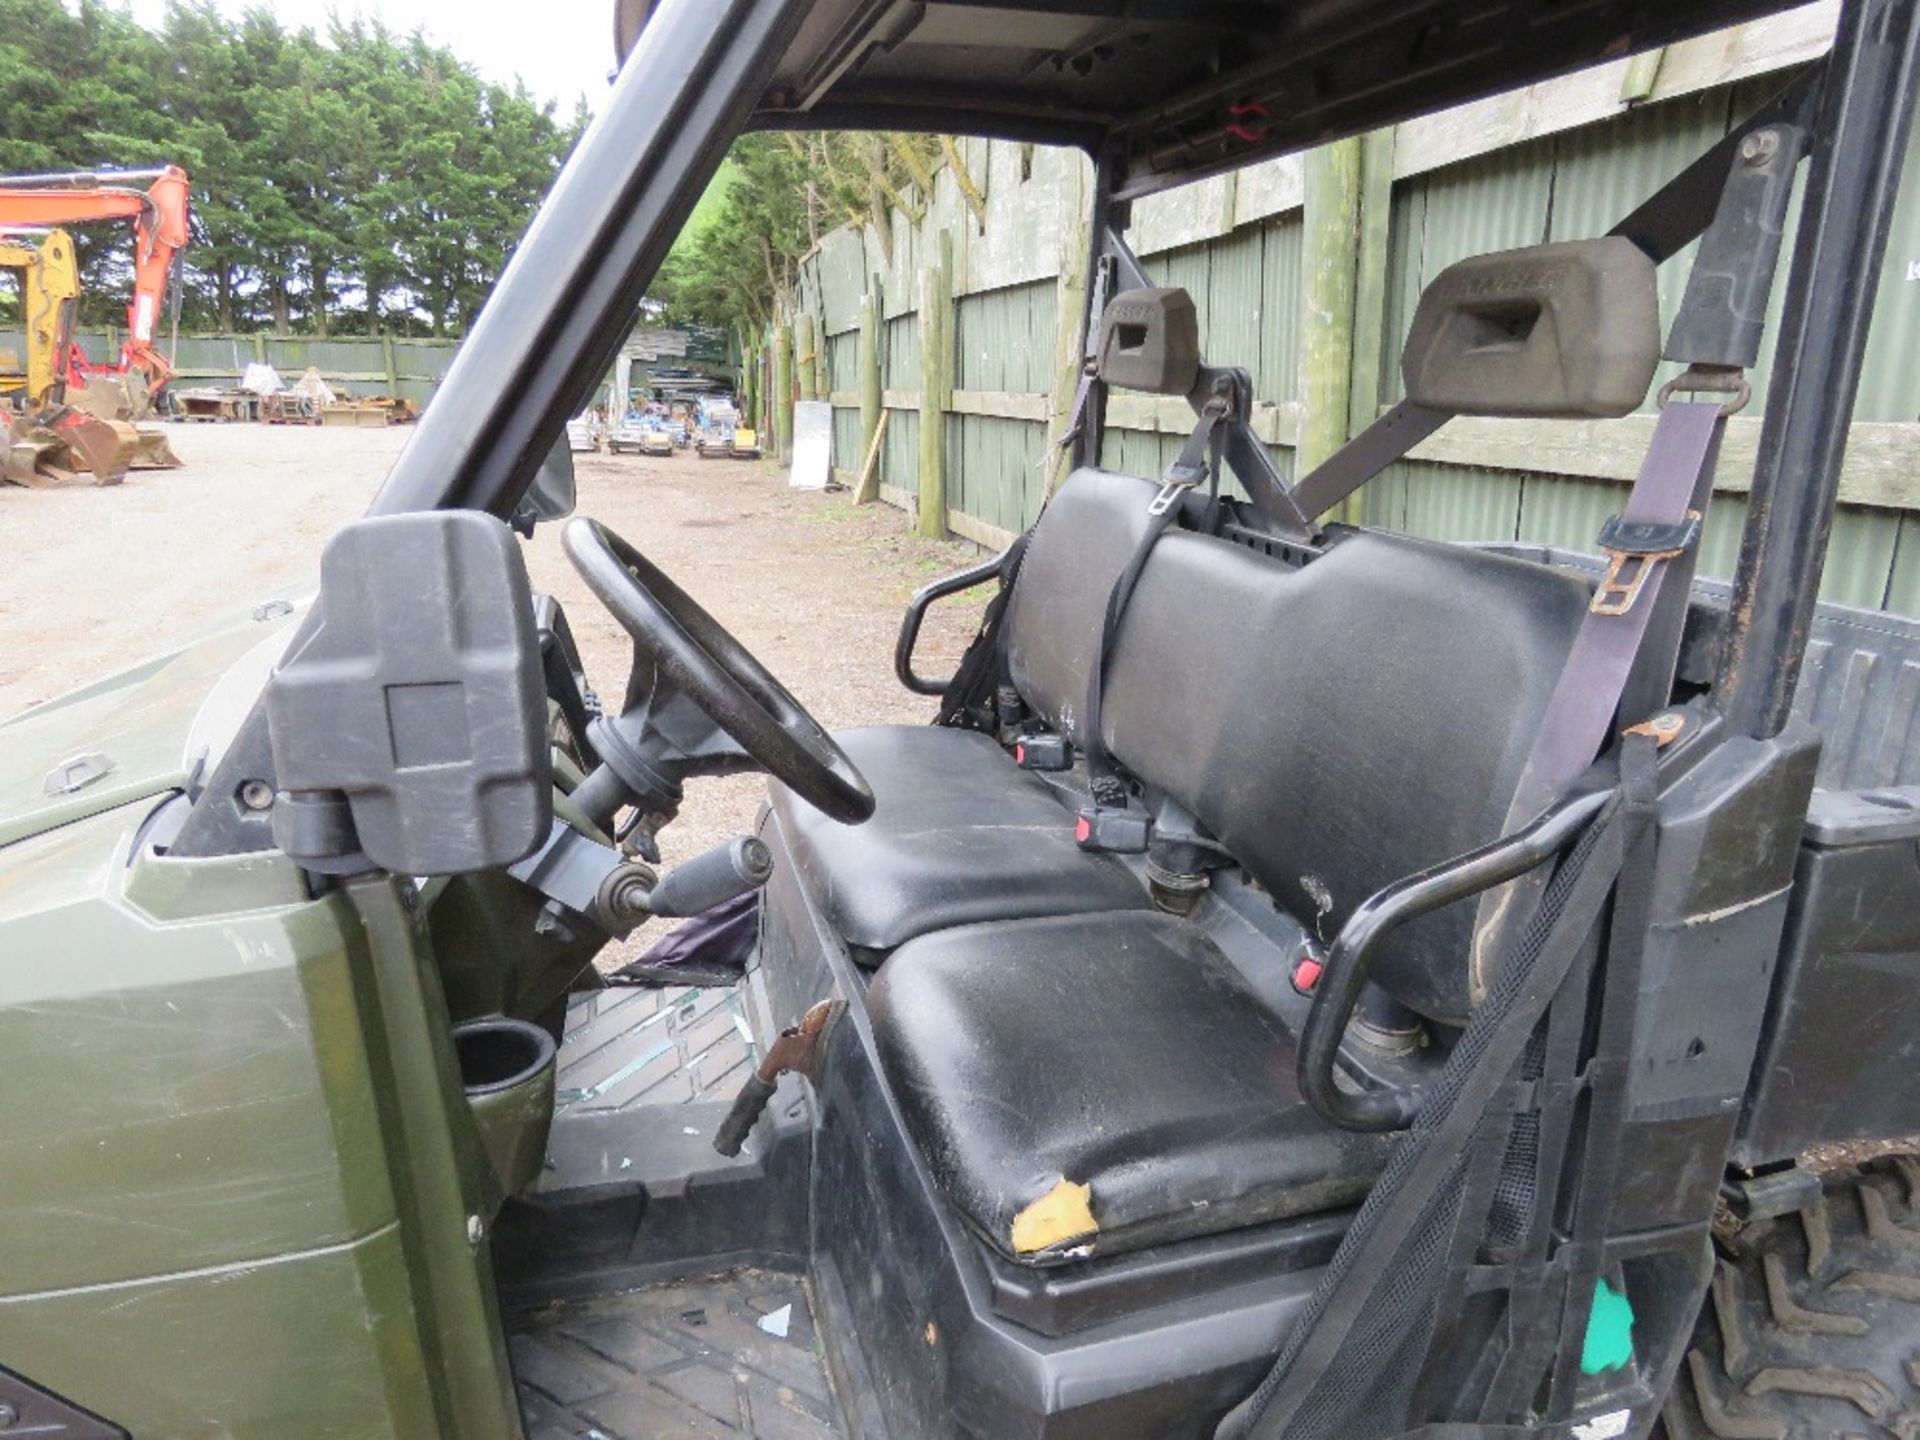 POLARIS RANGER DIESEL RTV REG:EU65 CLO. WHEN TESTED WAS SEEN TO DRIVE, STEER AND BRAKE......REQUIRES - Image 2 of 9